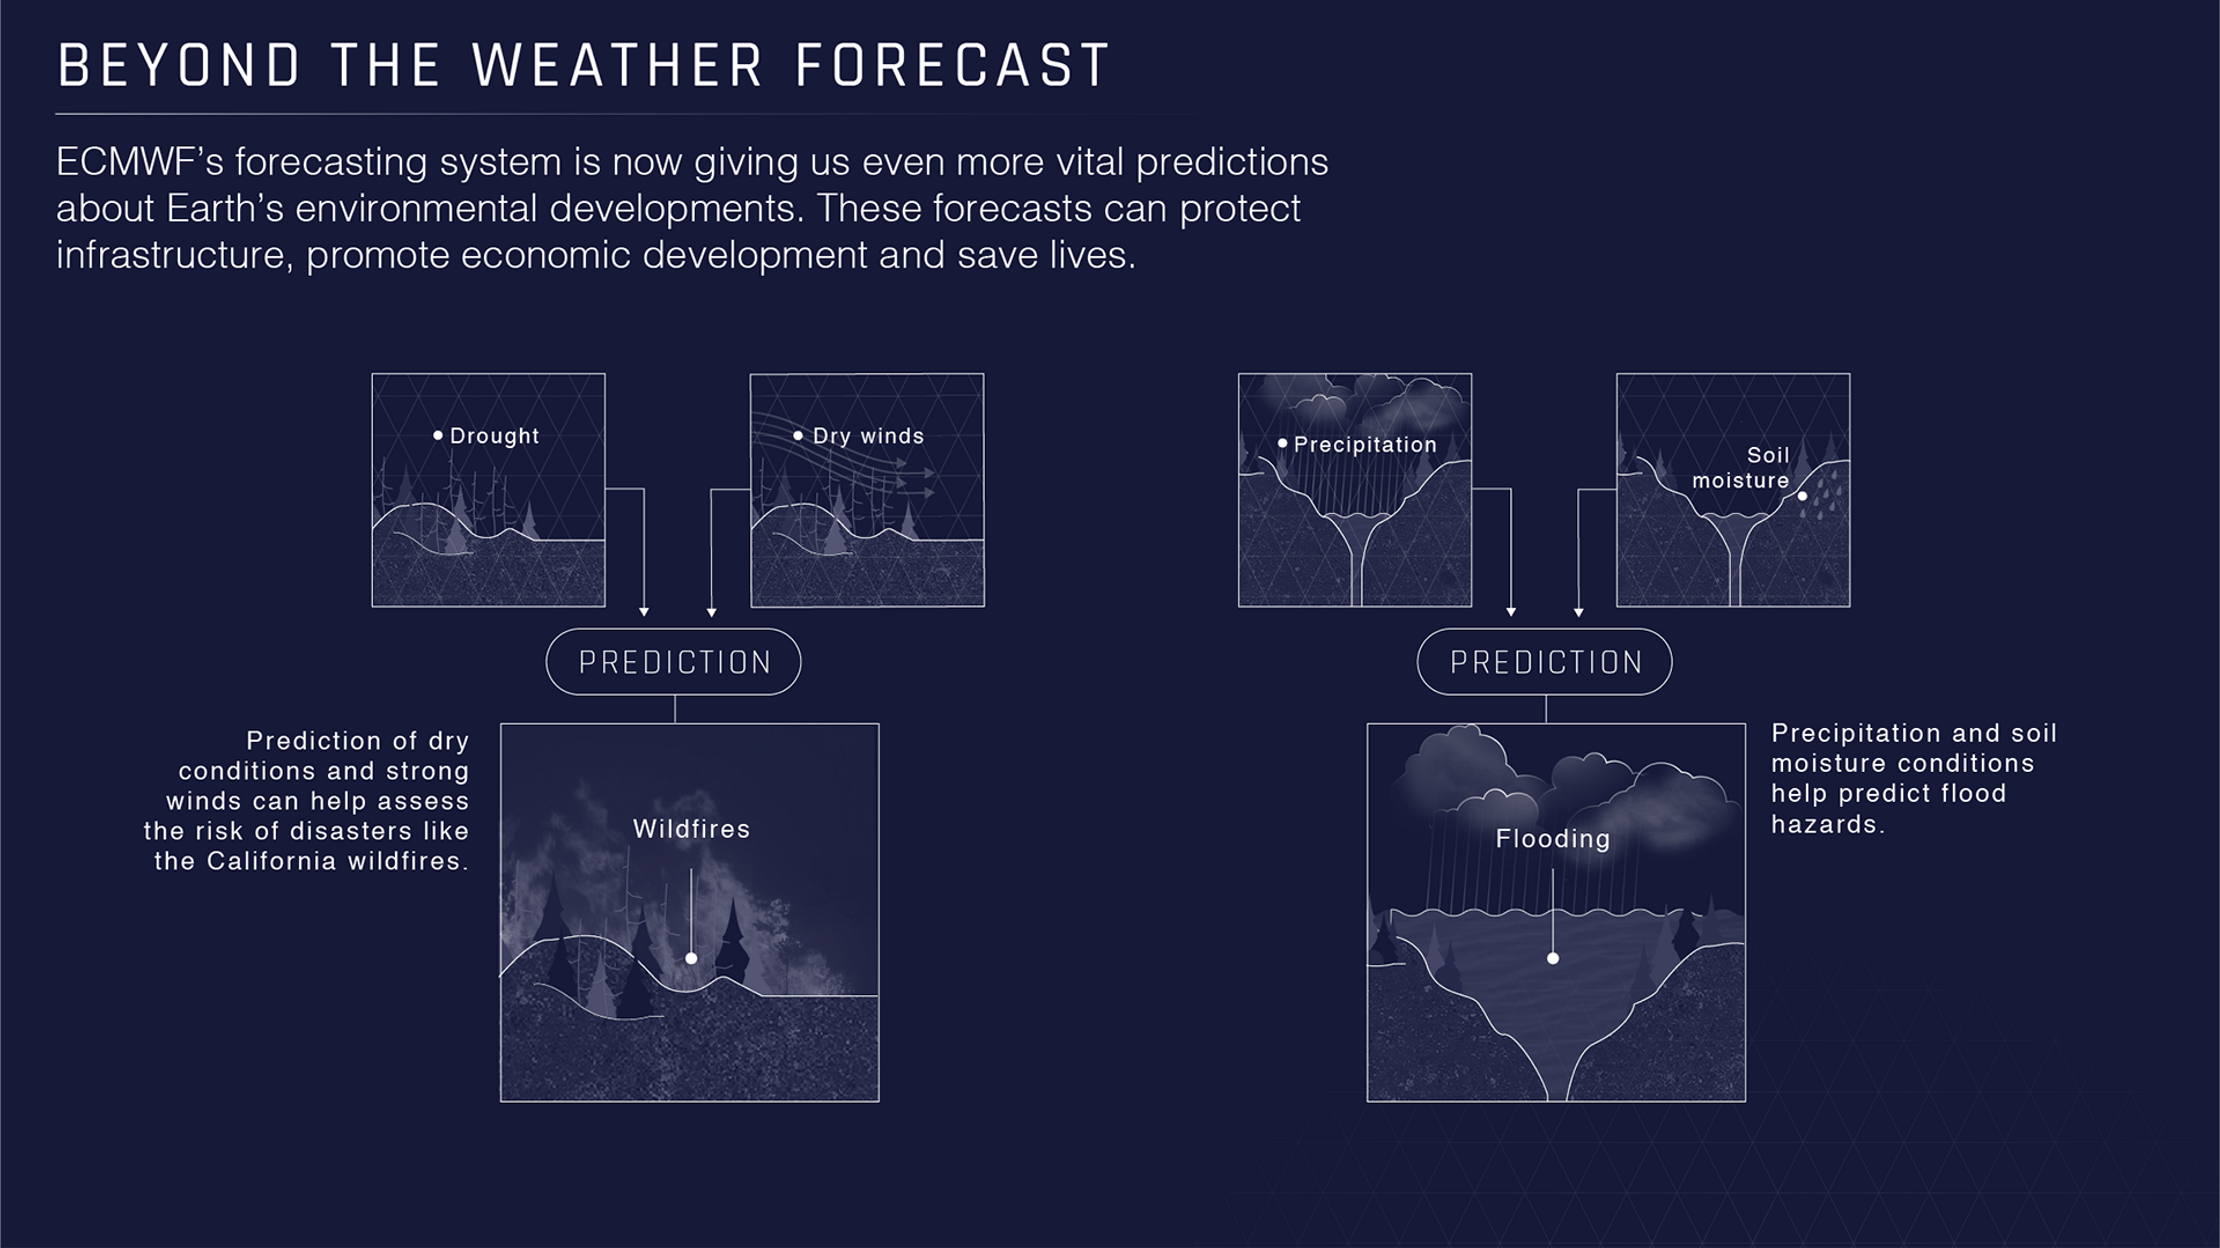 An animated graphic titled 'Beyond the Weather Forecast.' It shows how indicators like drought and dry winds can predict wildfires or precipitation and soil moisture can lead to flooding. It emphasises the value of ECMWF data in protecting us all against climate change.